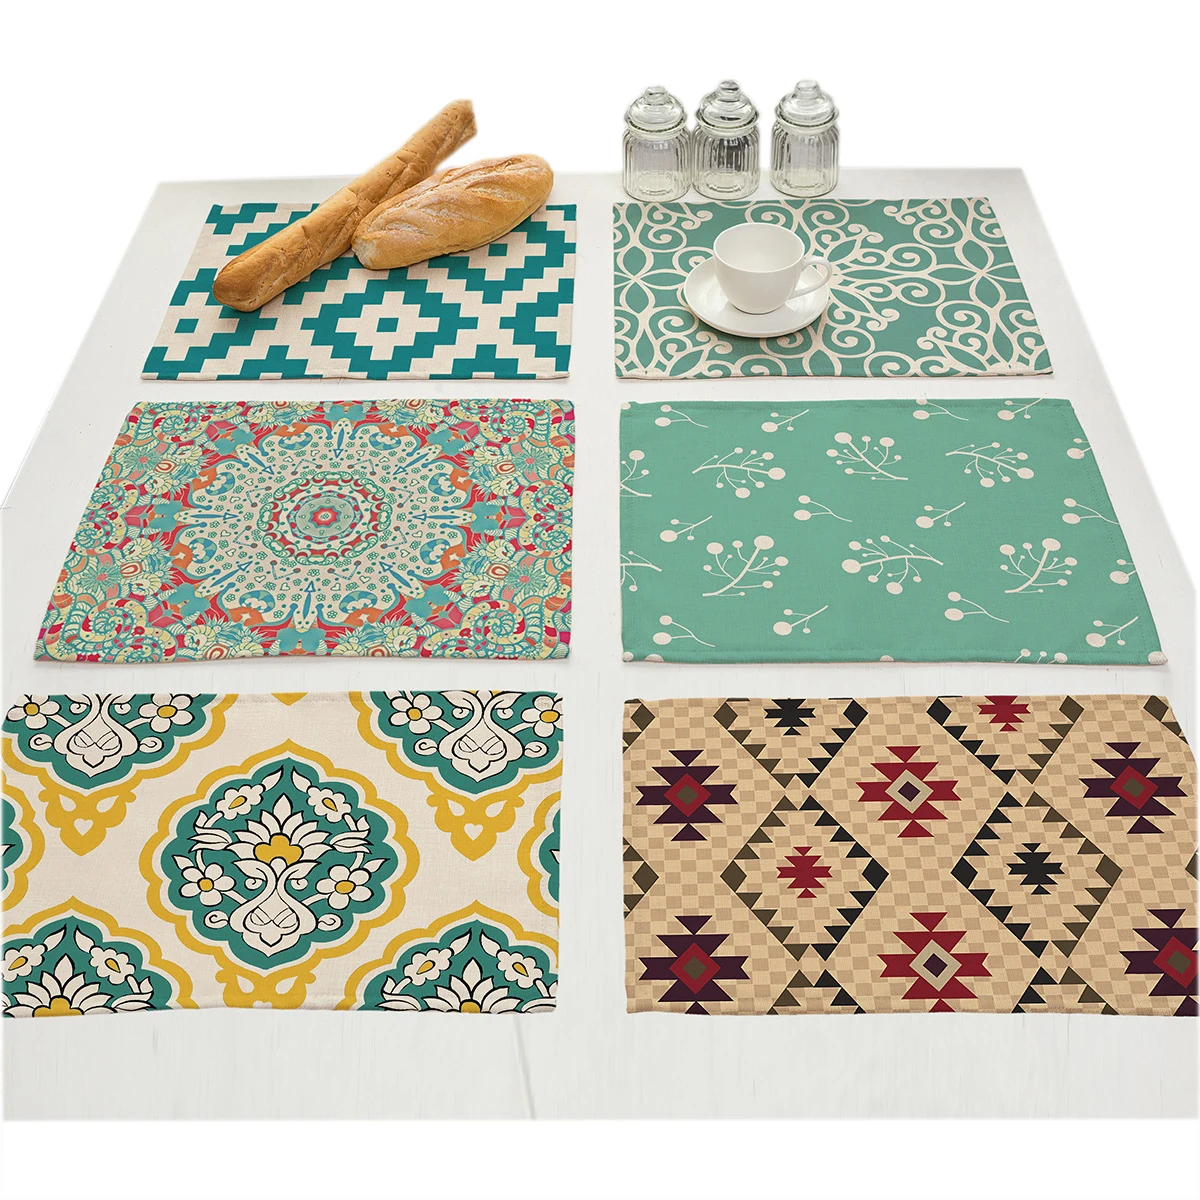 

Geometric Printed Placemats Flower Plant Linen Drink Coasters Cup Design Cloth Dining Table Mat Doilies Decoration Accessories